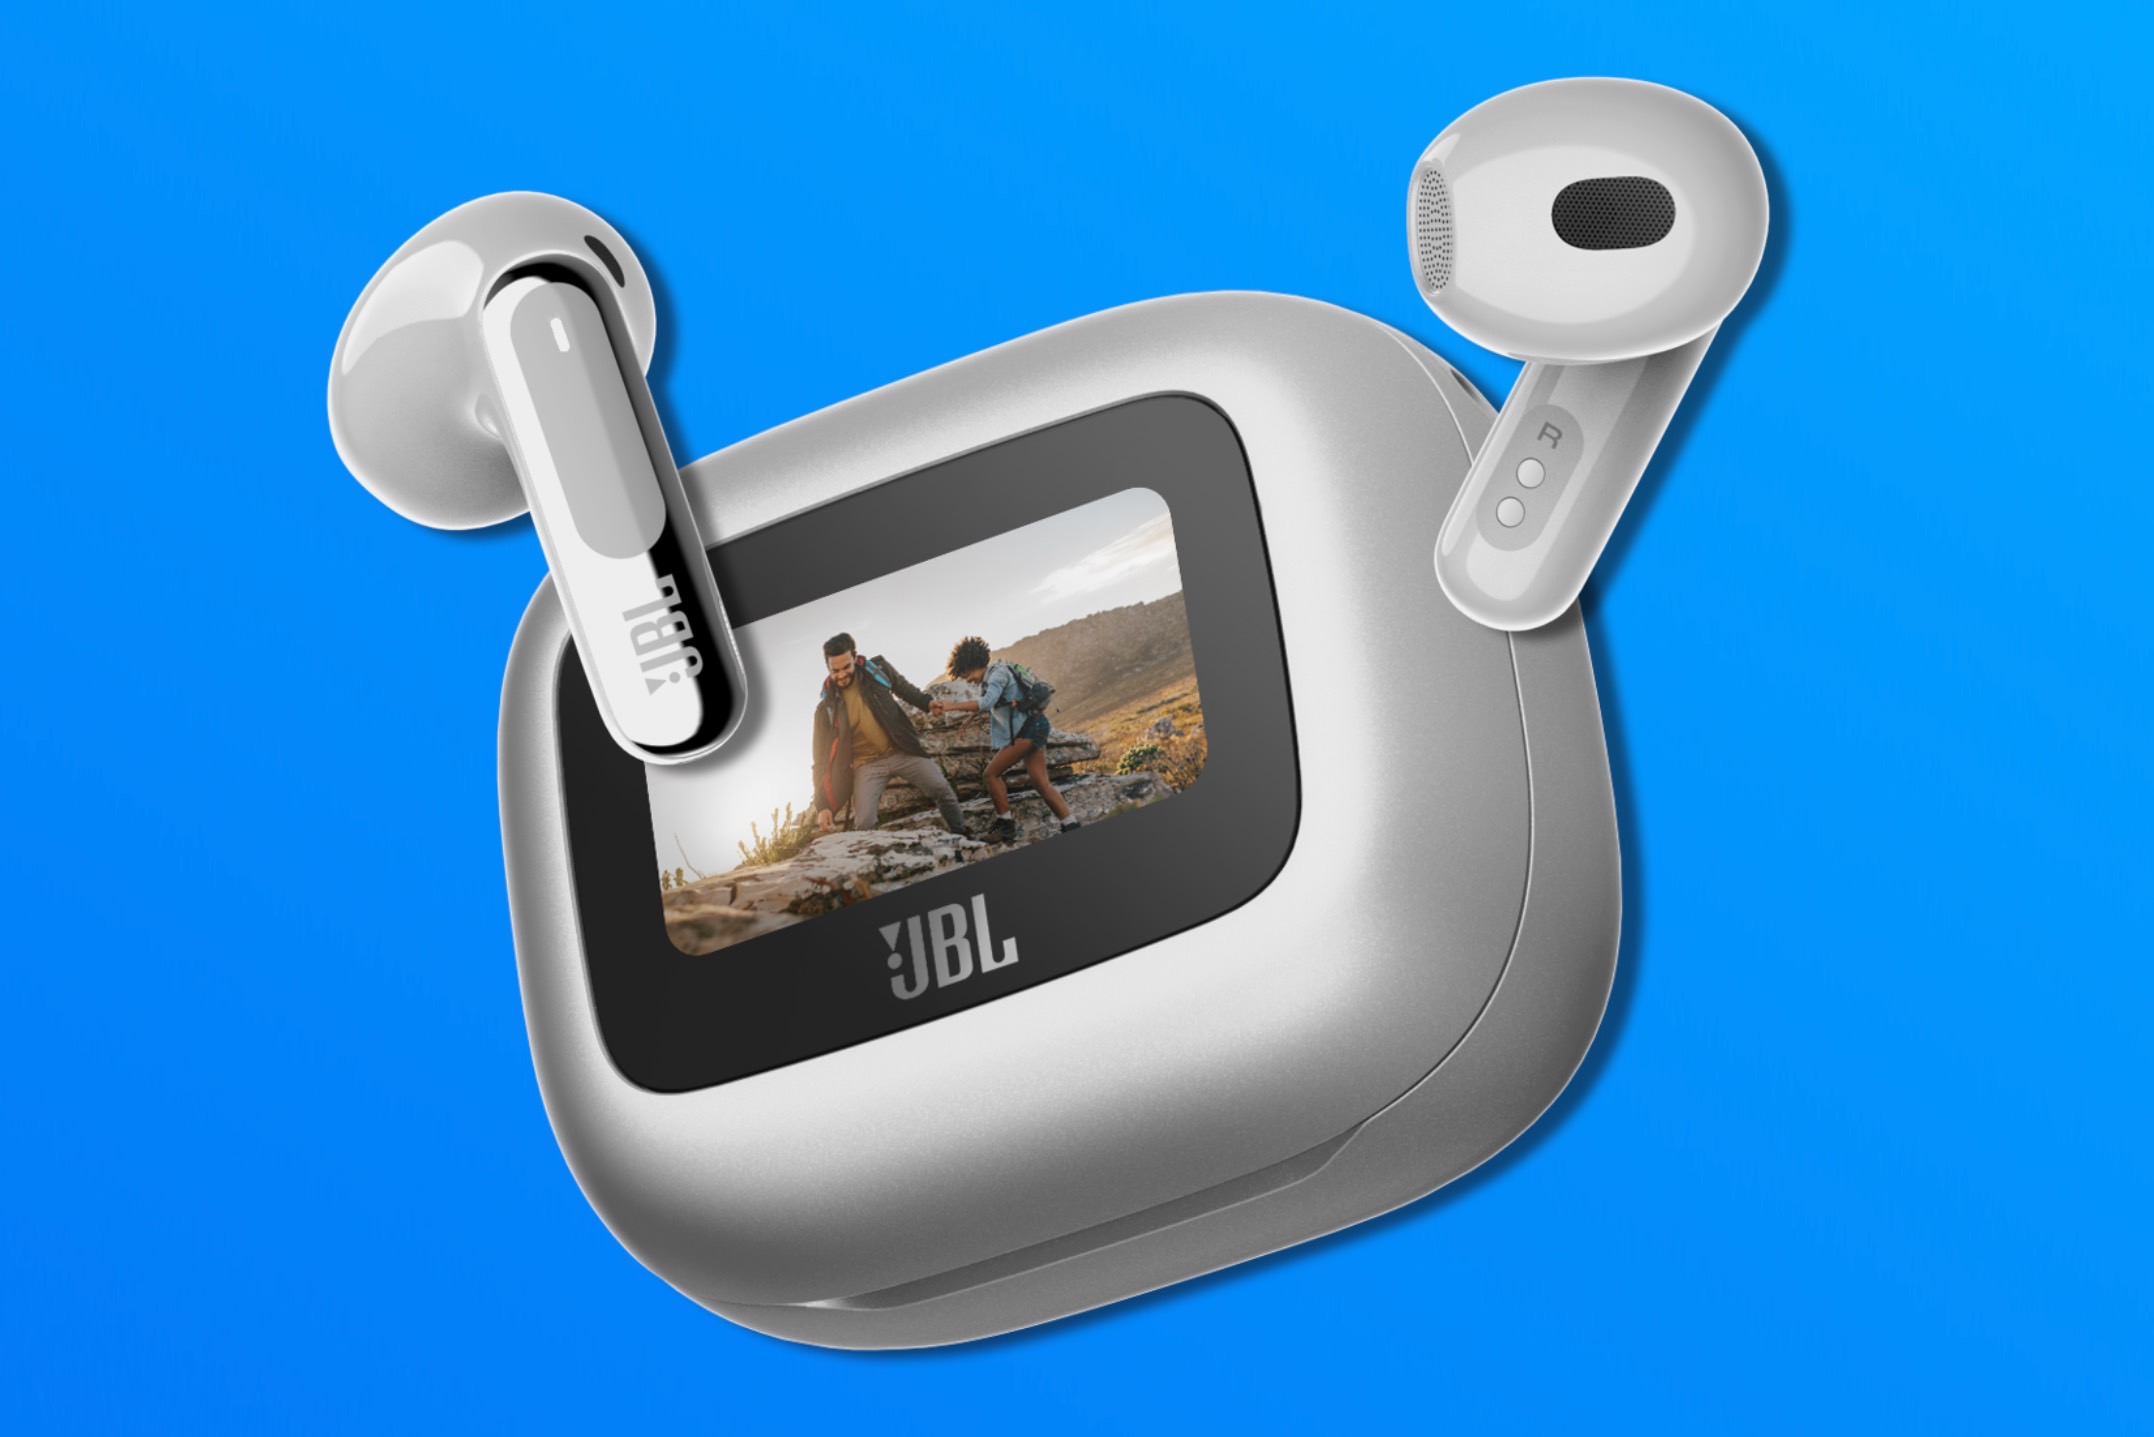 JBL\'s touchscreen charging case comes 3 Trends more to wireless earbuds Digital 